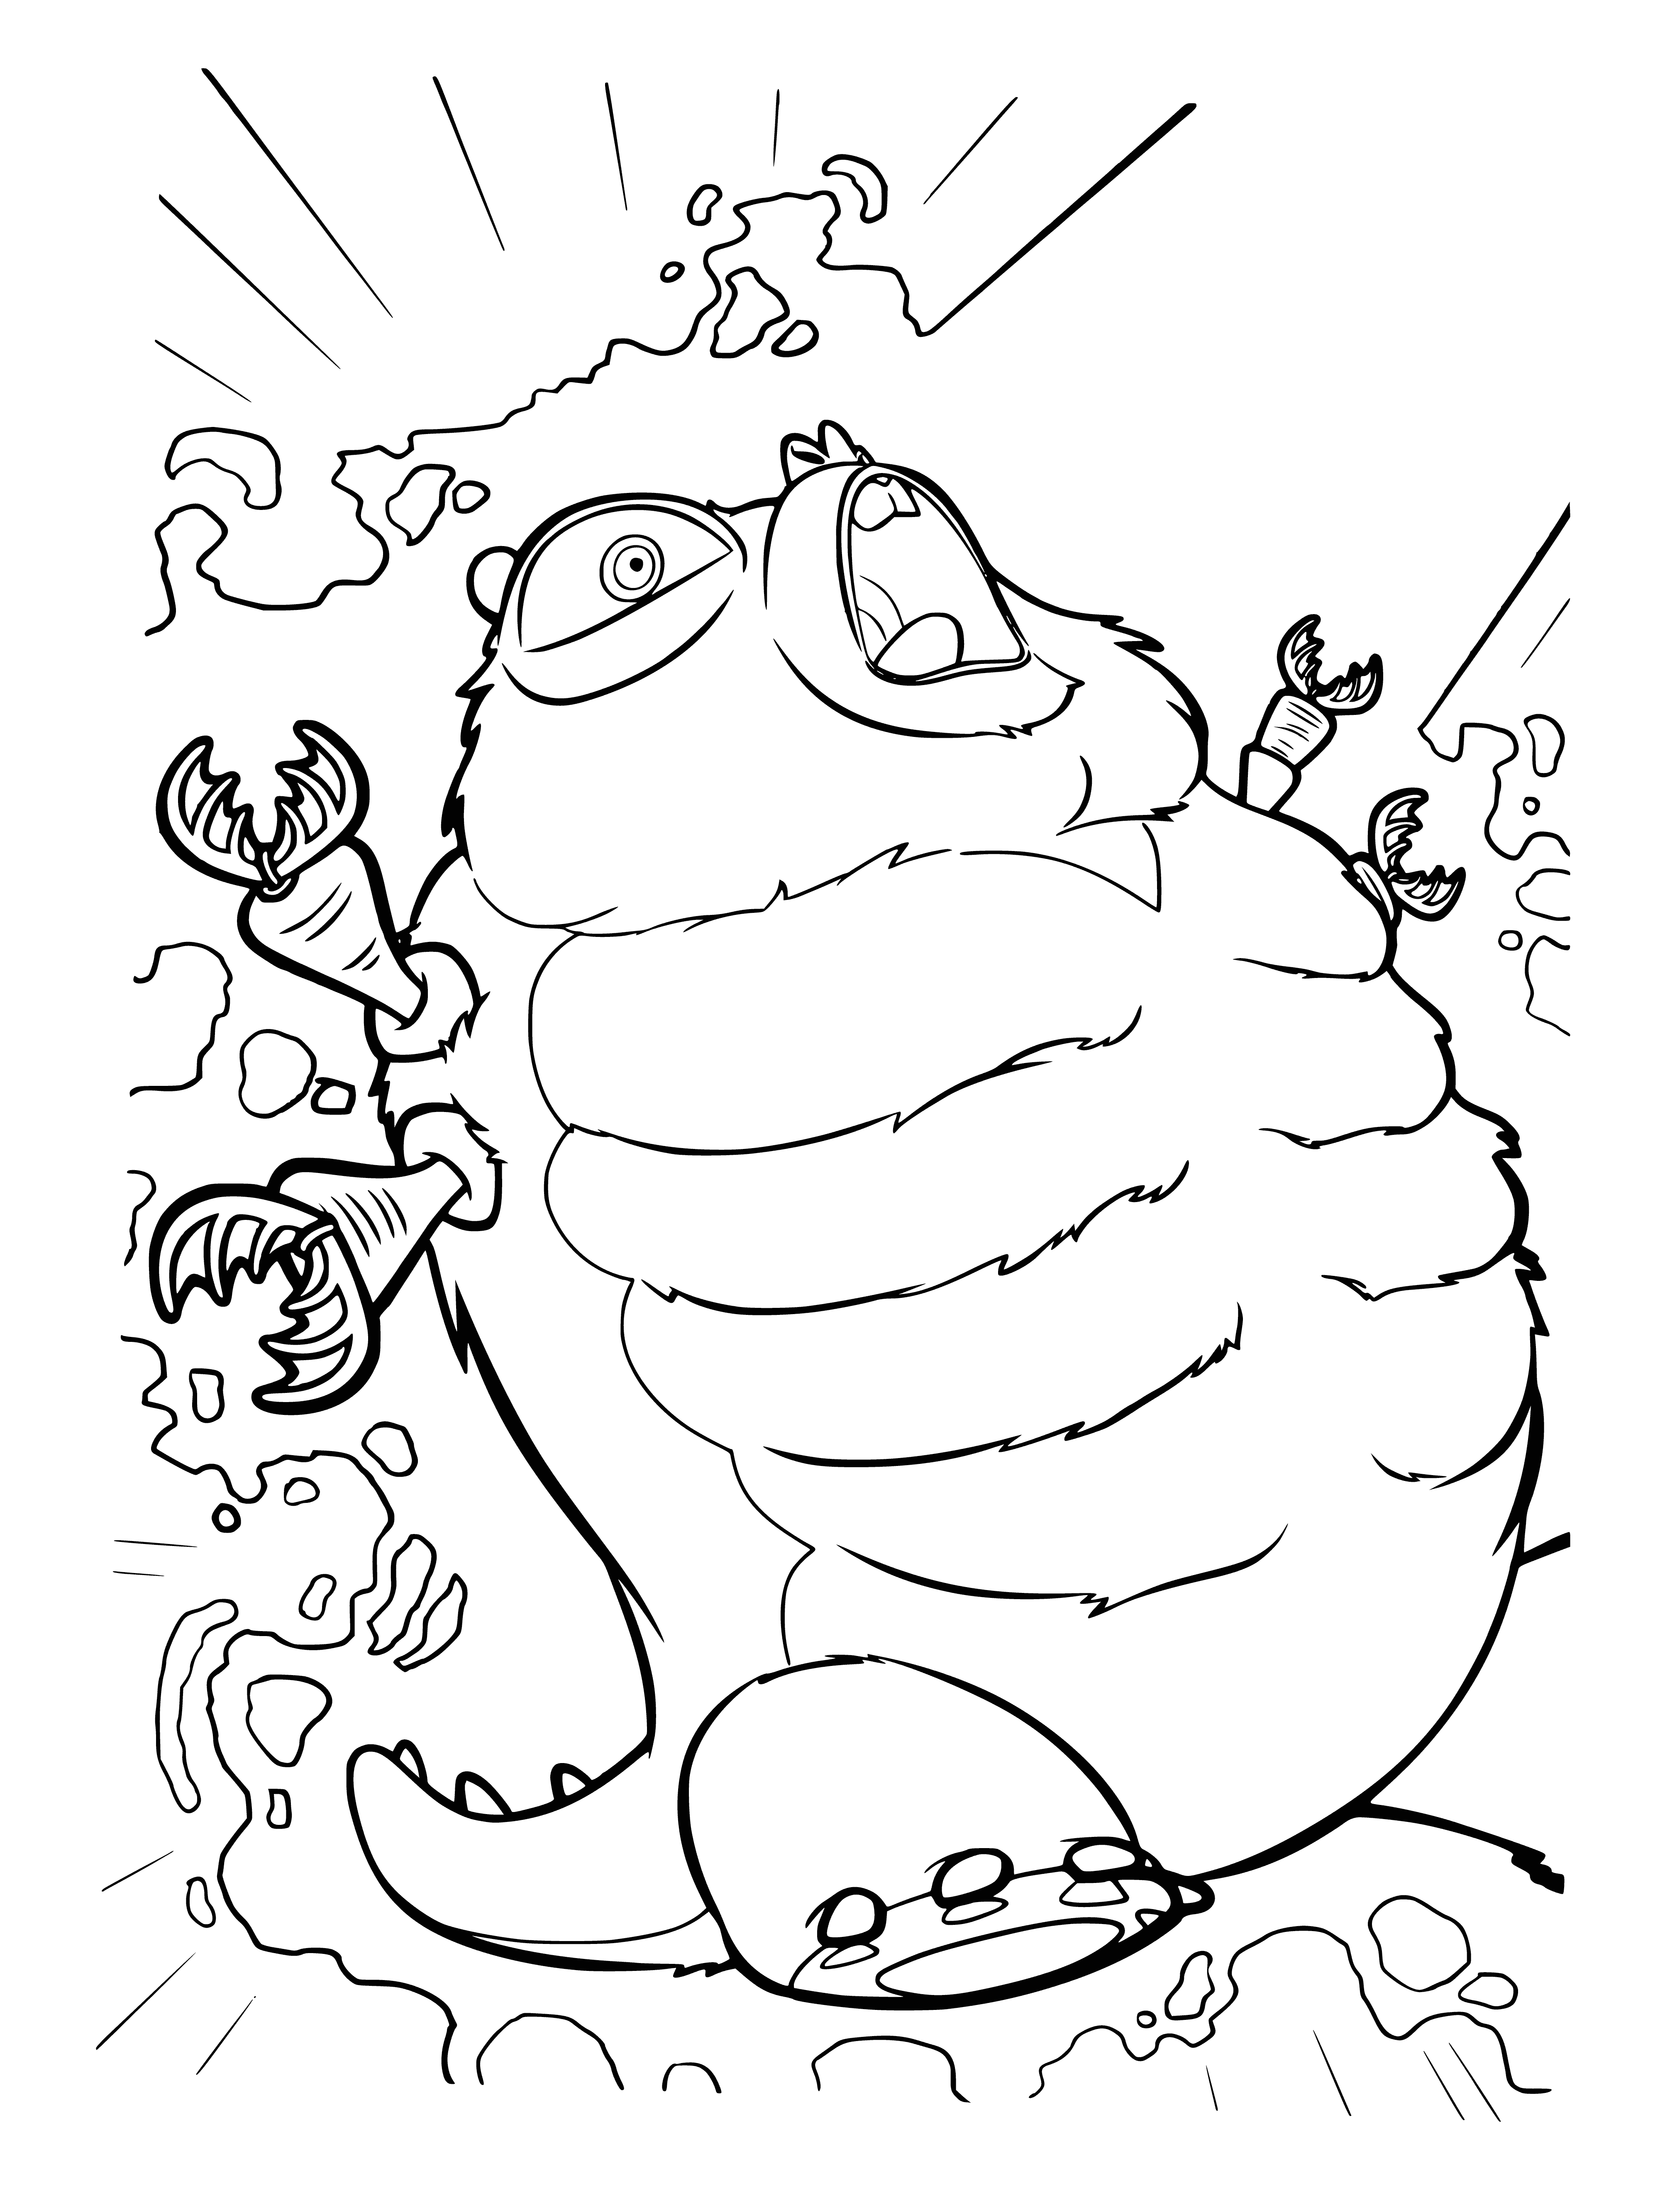 coloring page: Giant insect Insectosaurus wreaking havoc on a city, smashing buildings & cars, chaos everywhere--people running for their lives.